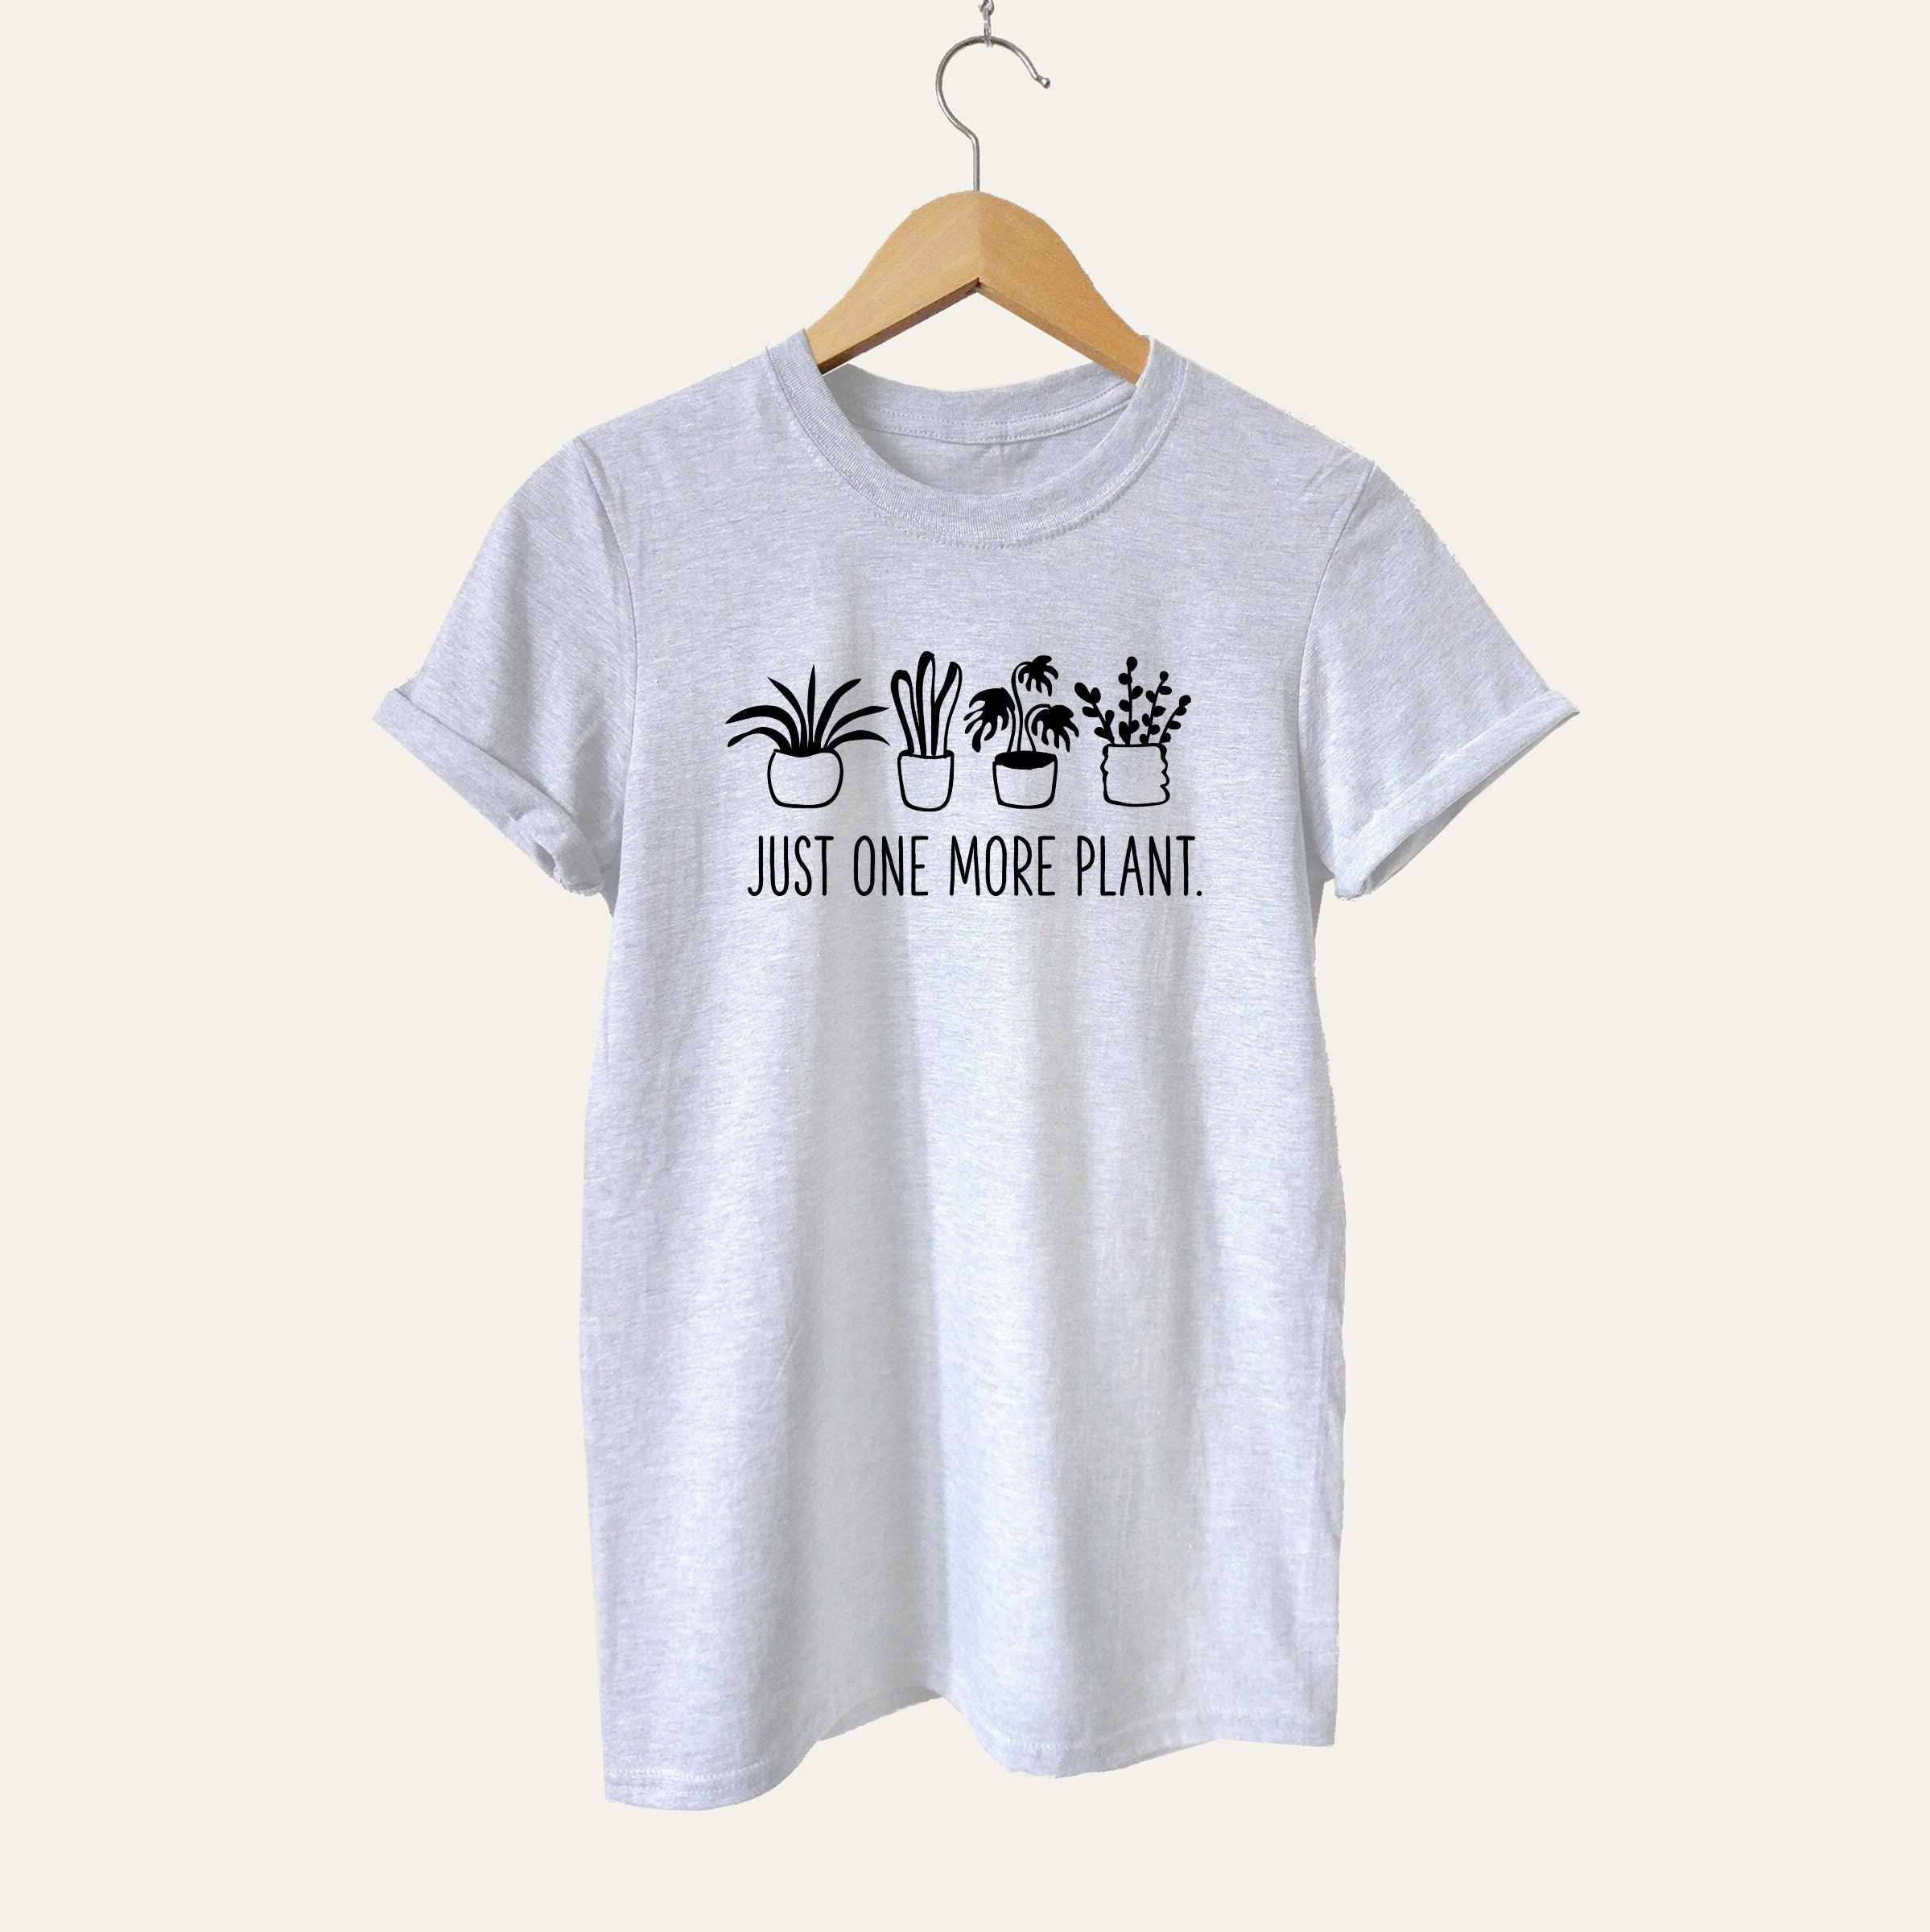 Discover Plant Shirt for Plantaholic with Quote Just One More Plant, Flower T Shirt, Gardening Gift for Her, Plant Lady Mom Slogan Graphic Tee